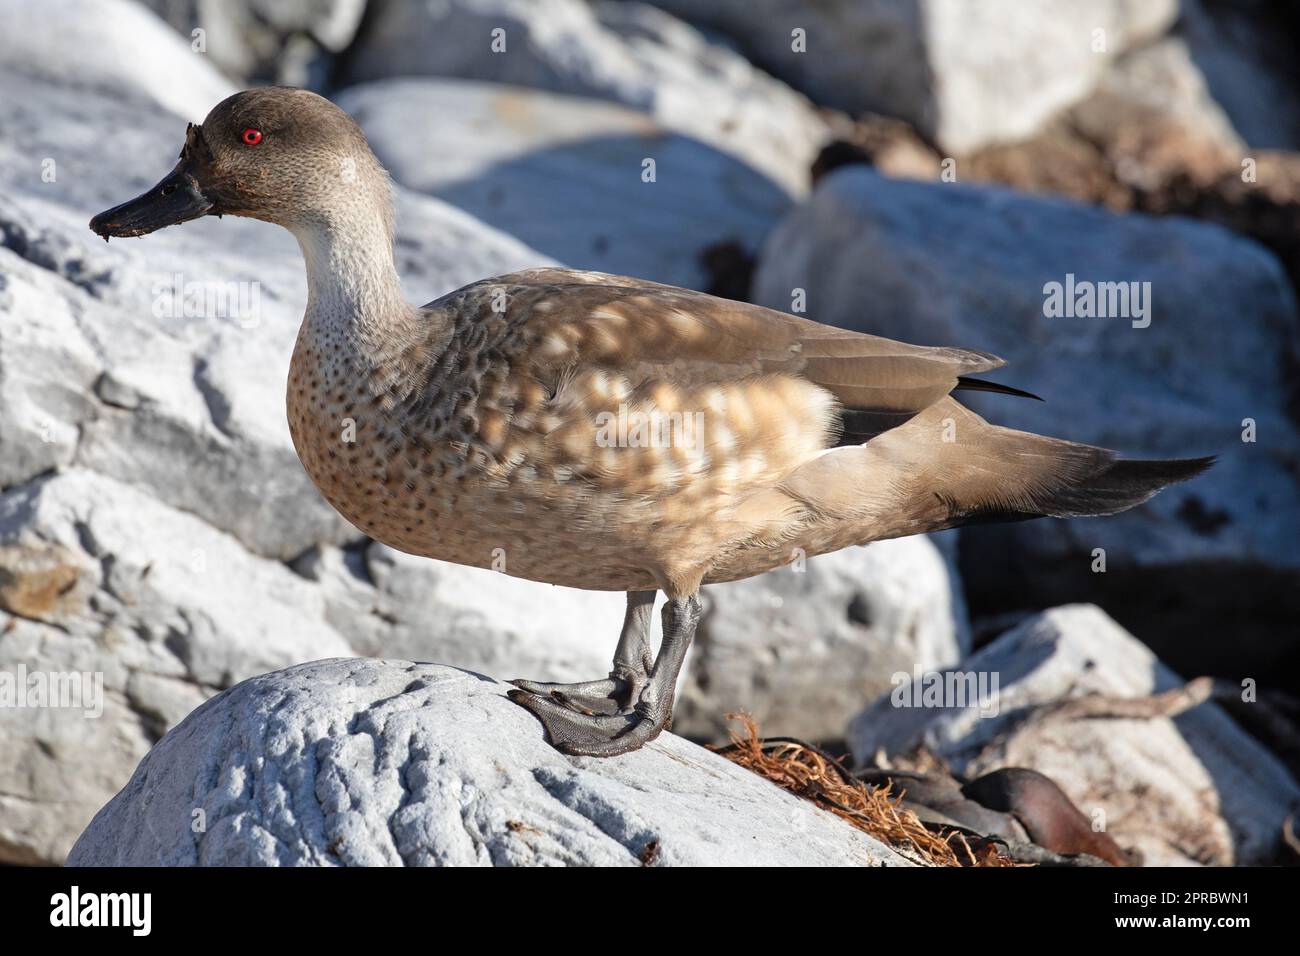 A Crested Duck, or Patagonian Duck. Lophonetta Specularioides. Taken on The Falkland Islands. Stock Photo